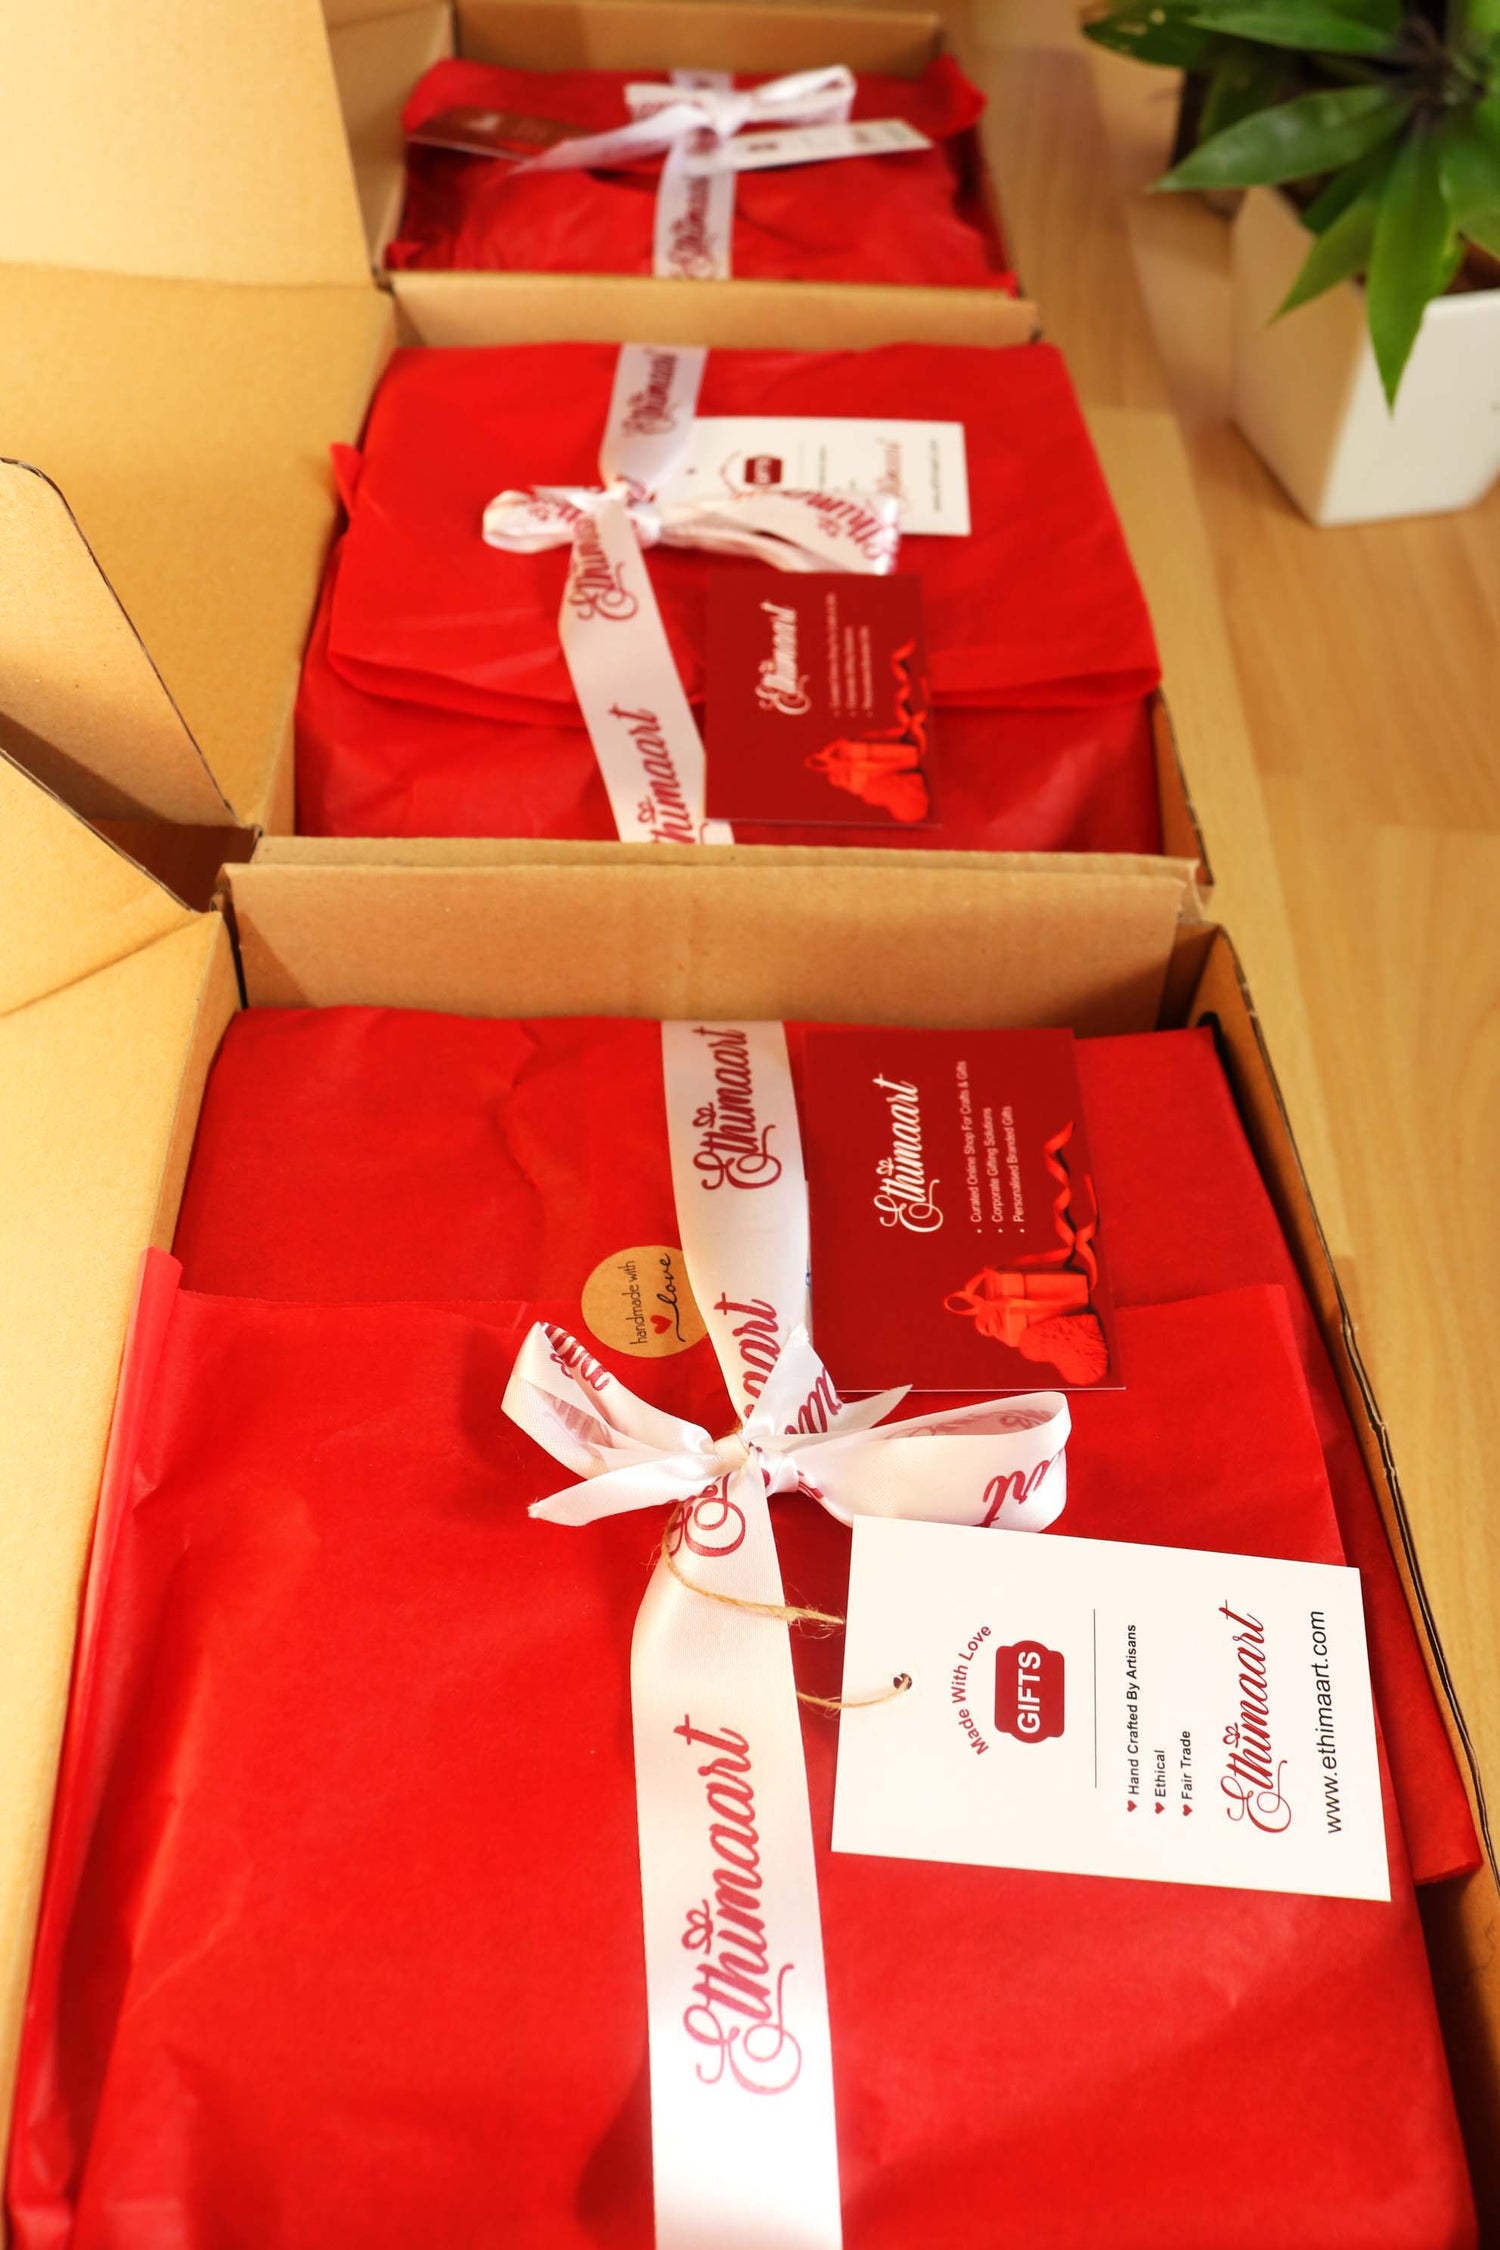 Ethical and fair trade corporate gift box for clients, team, thank you gift by ethimaart ltd 